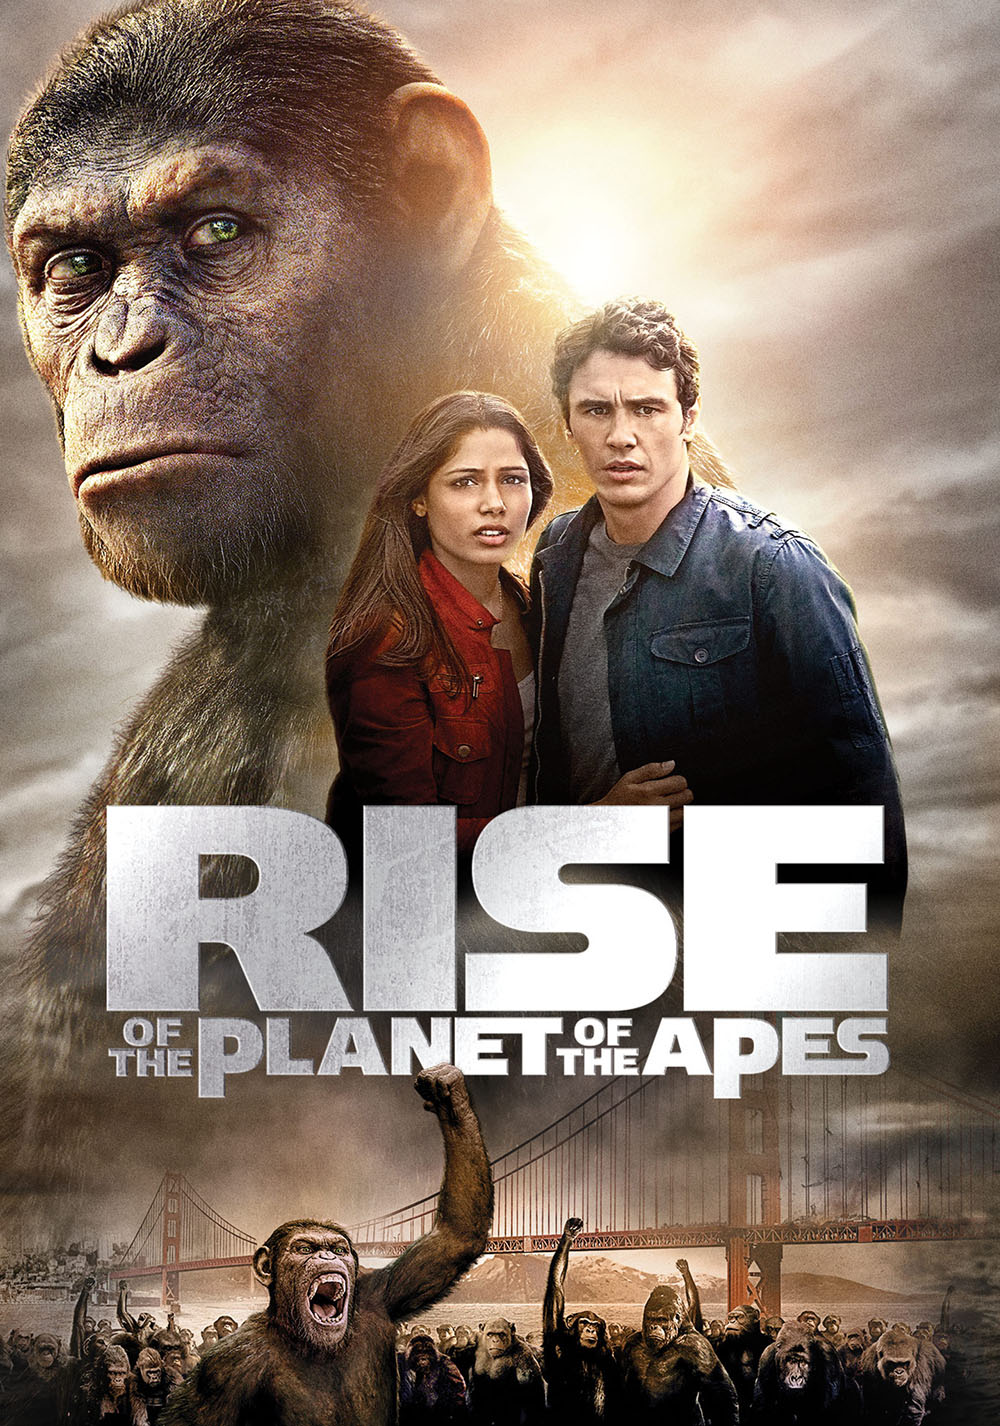 Rise of the planet of the apes full movie free download in hindi full